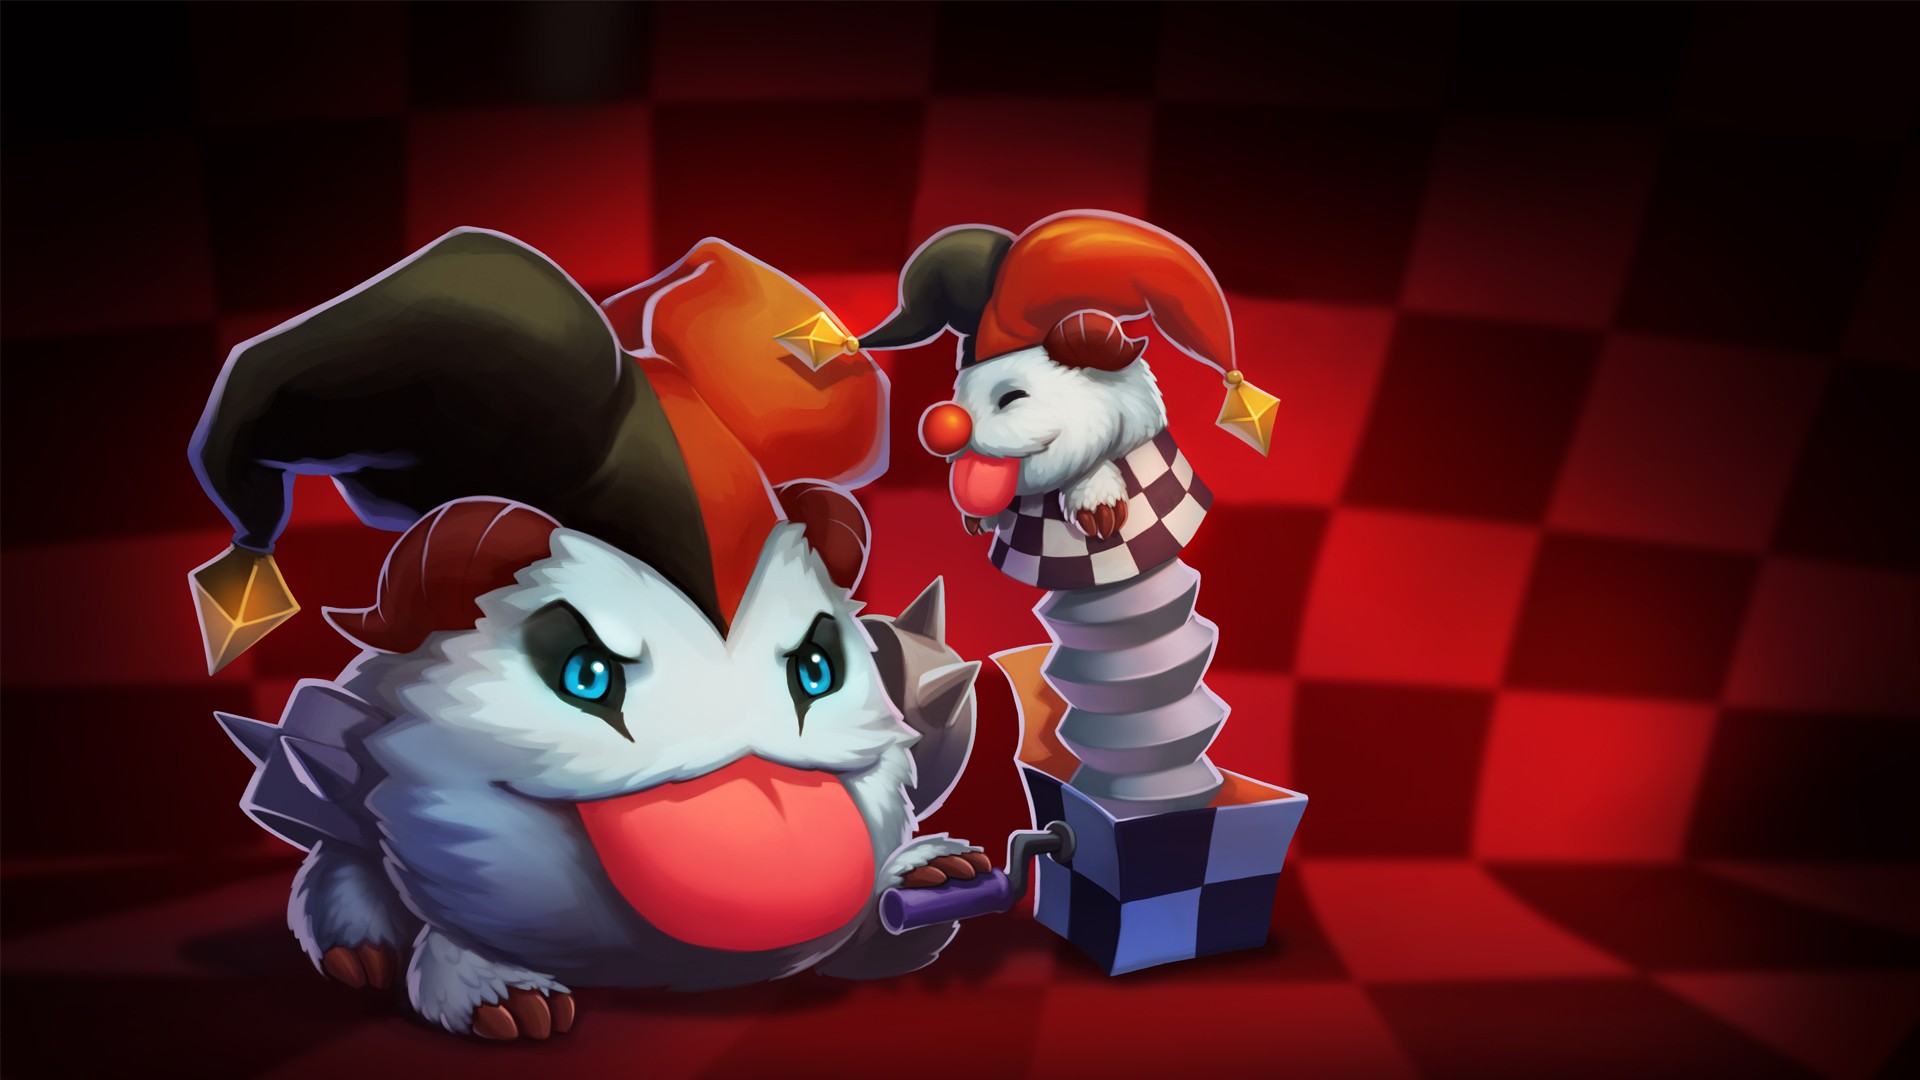 General 1920x1080 League of Legends Shaco (League of Legends) video game art Poro (League of Legends) PC gaming video game characters digital art